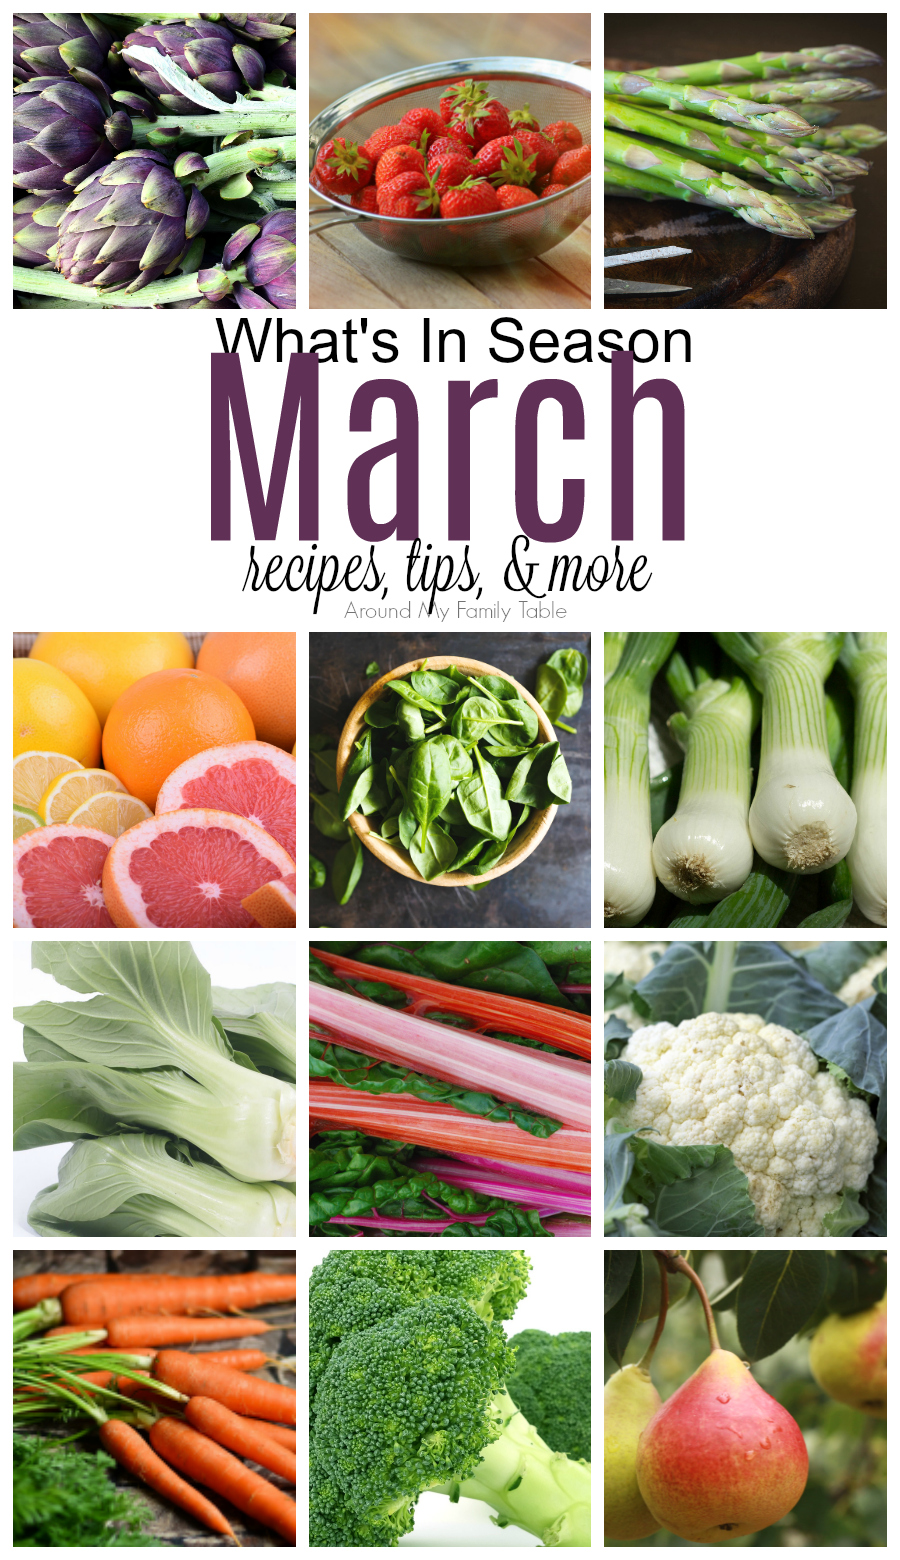 This March -- What’s In Season Guide is full of tips and recipes to inspire you to shop and eat seasonally.